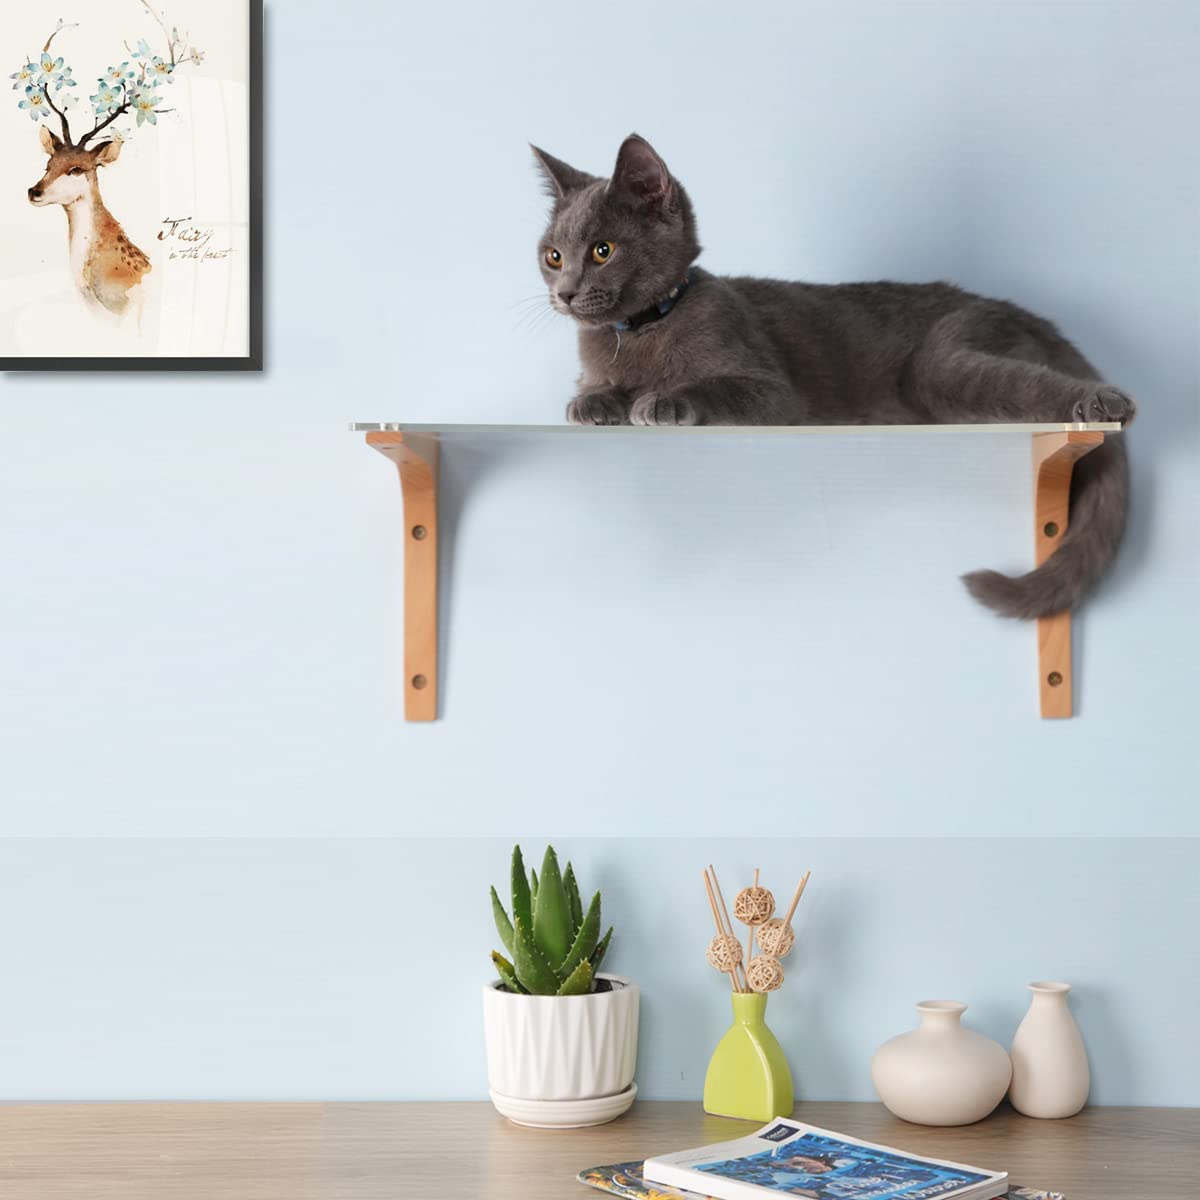 TAKEKIT Floating Cat Shelf for Wall, Clear Acrylic and Solid Wood Cat Wall Furniture, Wall Mounted Cat Perch and Cat Bed for Sleeping Playing Climbing and Lounging, Suitable for Kitty and Large Cat